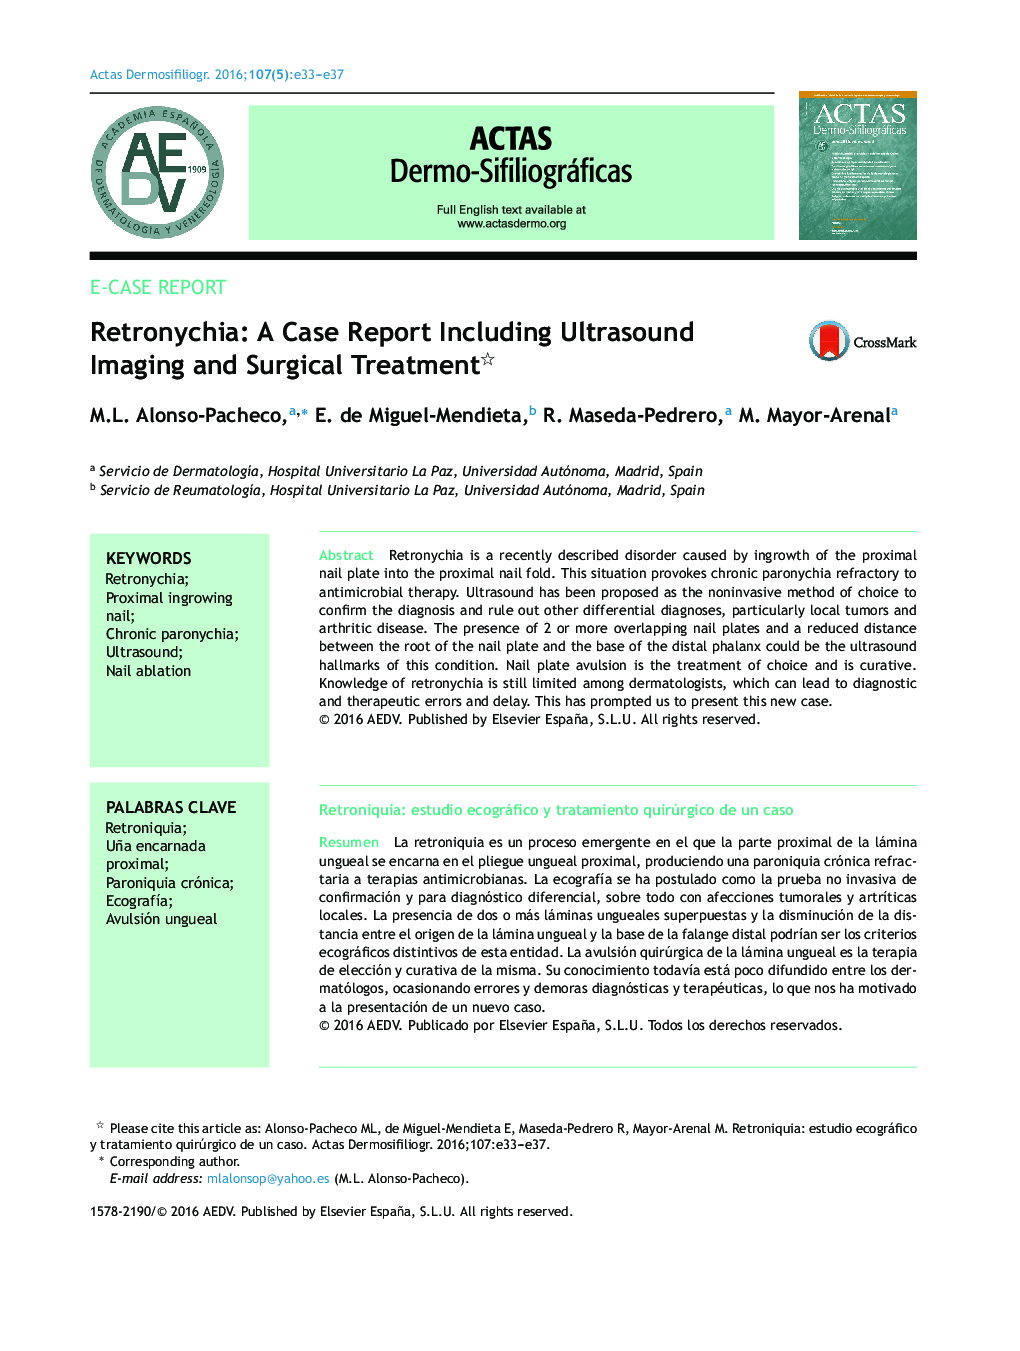 Retronychia: A Case Report Including Ultrasound Imaging and Surgical Treatment 